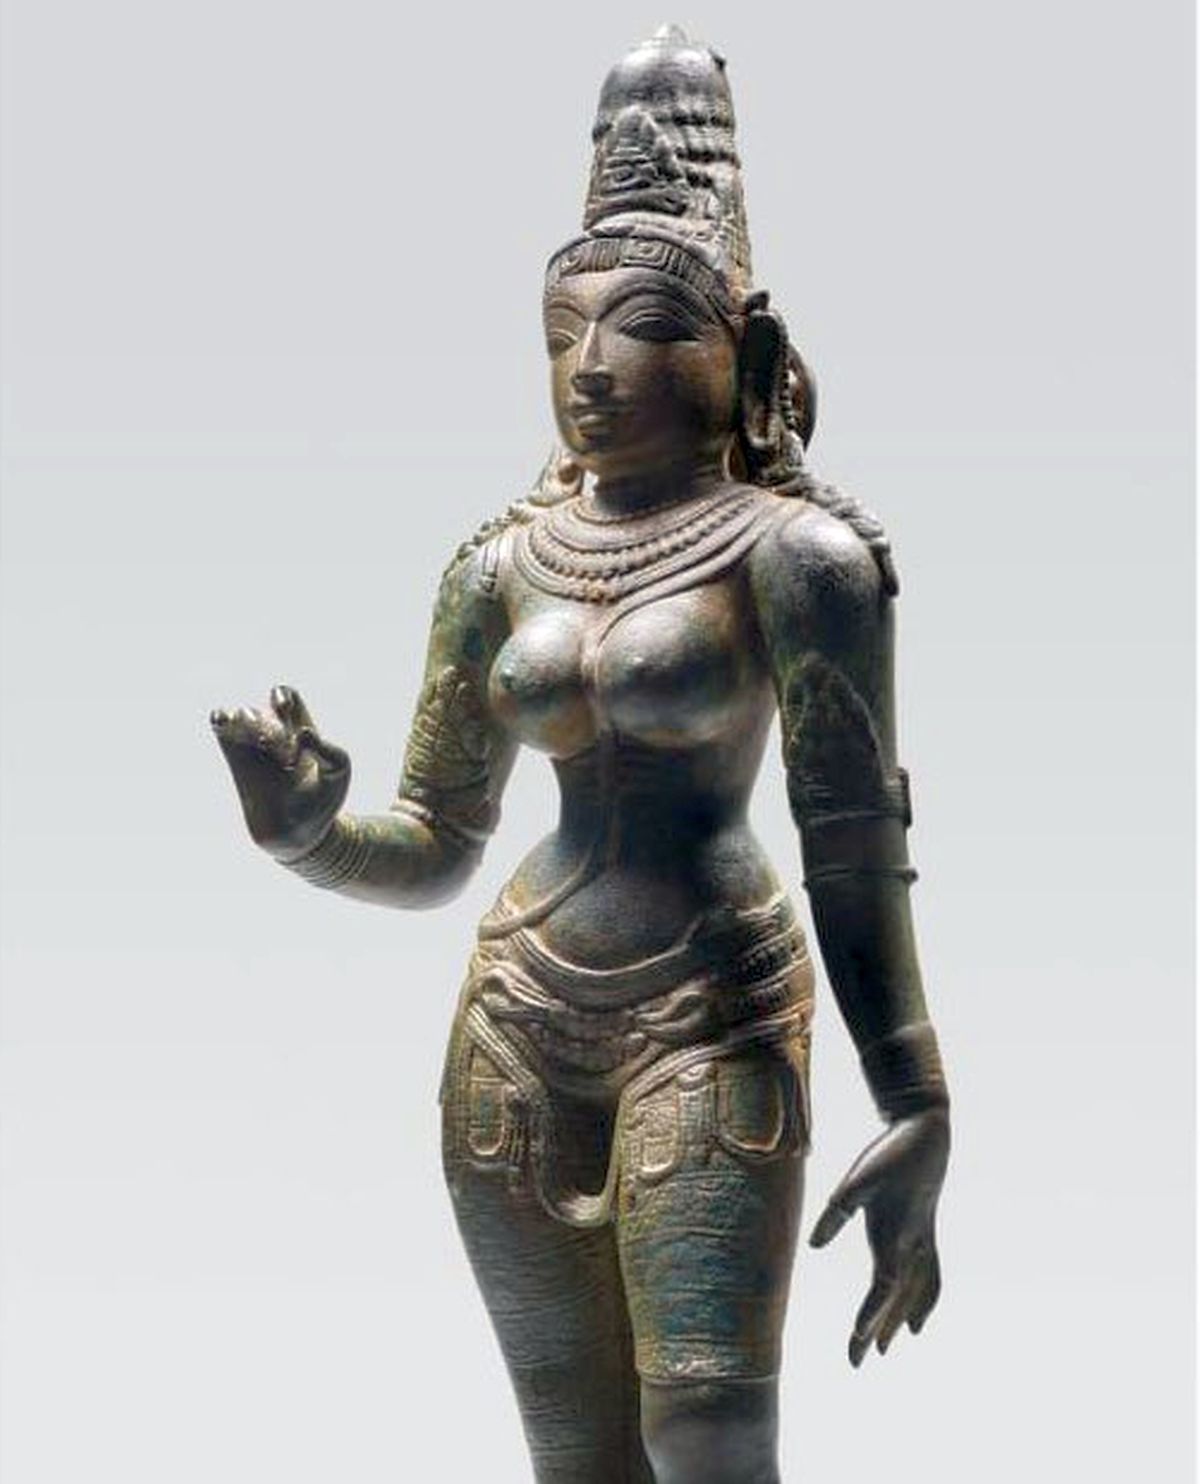 Goddess Parvati idol worth Rs 1.6 cr found in US after 50 years ...